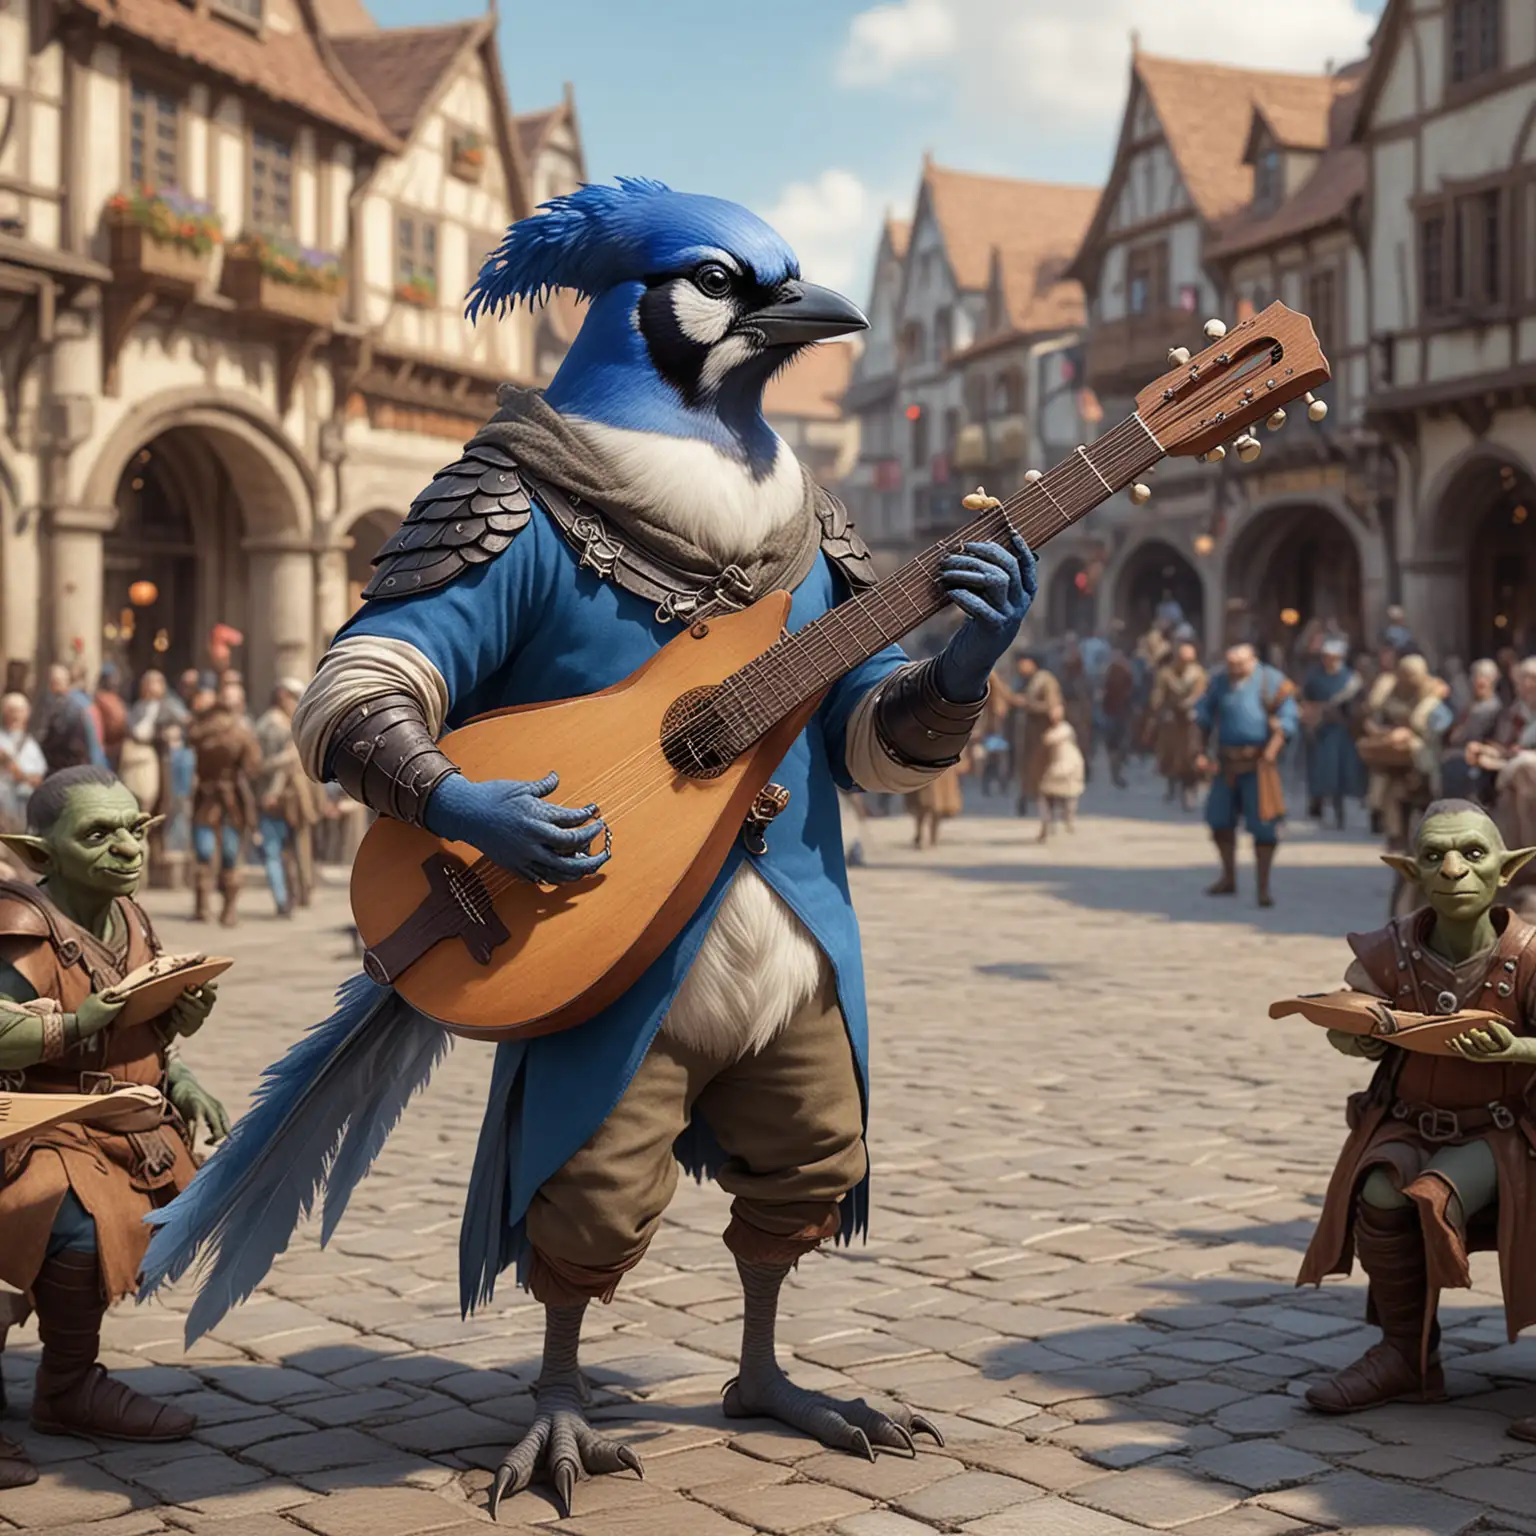 humanoid blue jay playing a lute in a town square, orc elf human dwarf crowd